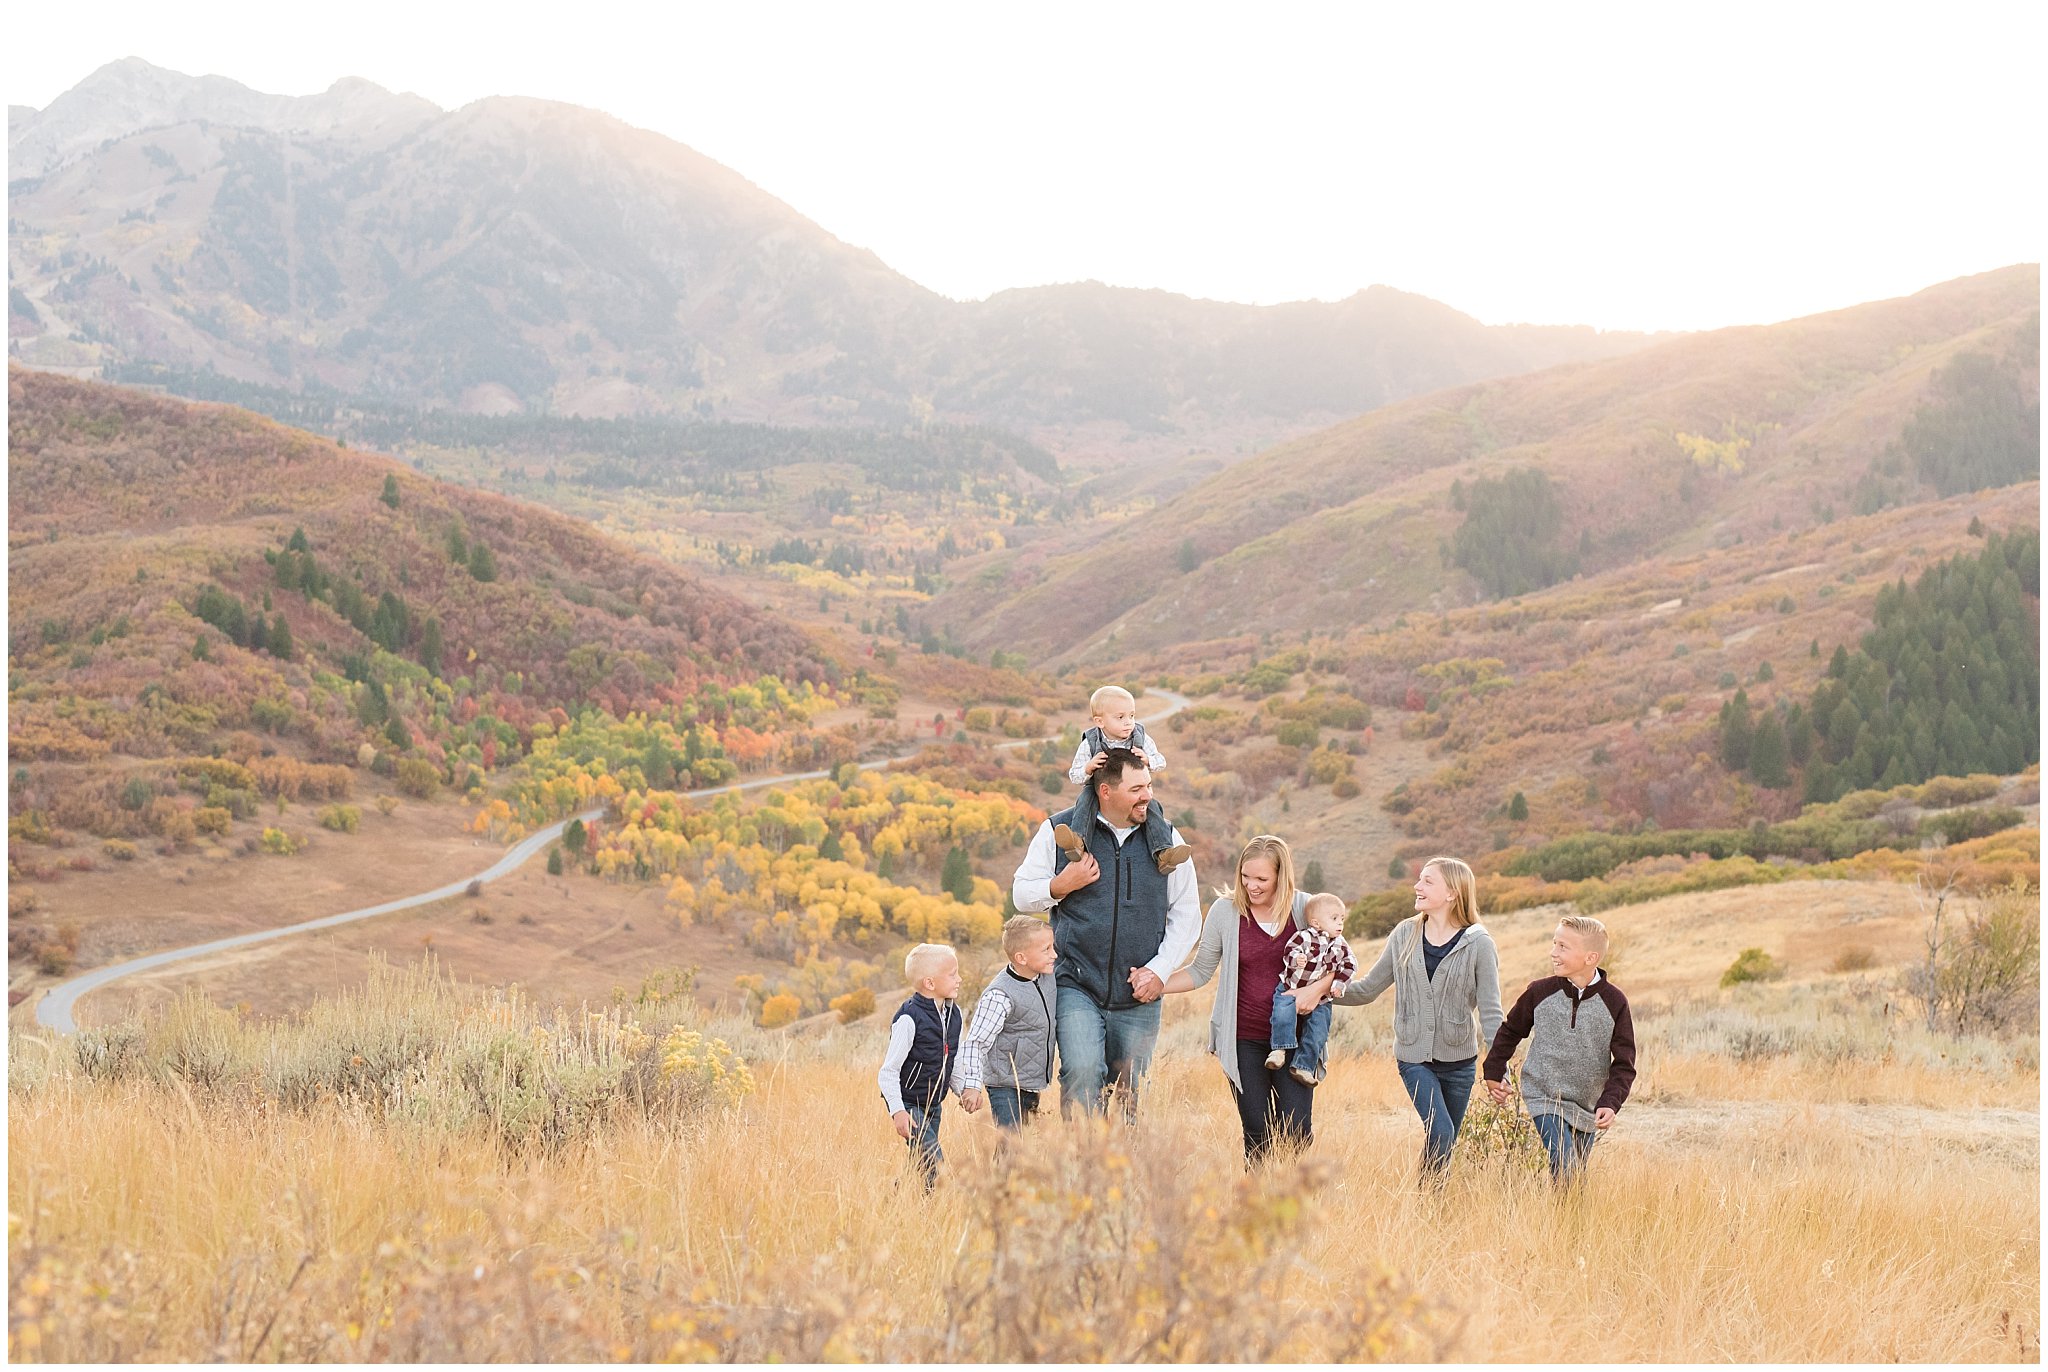 Family with 6 kids walking in the fall mountains | Fall family photo session at Snowbasin | Snowbasin Resort | Jessie and Dallin Photography